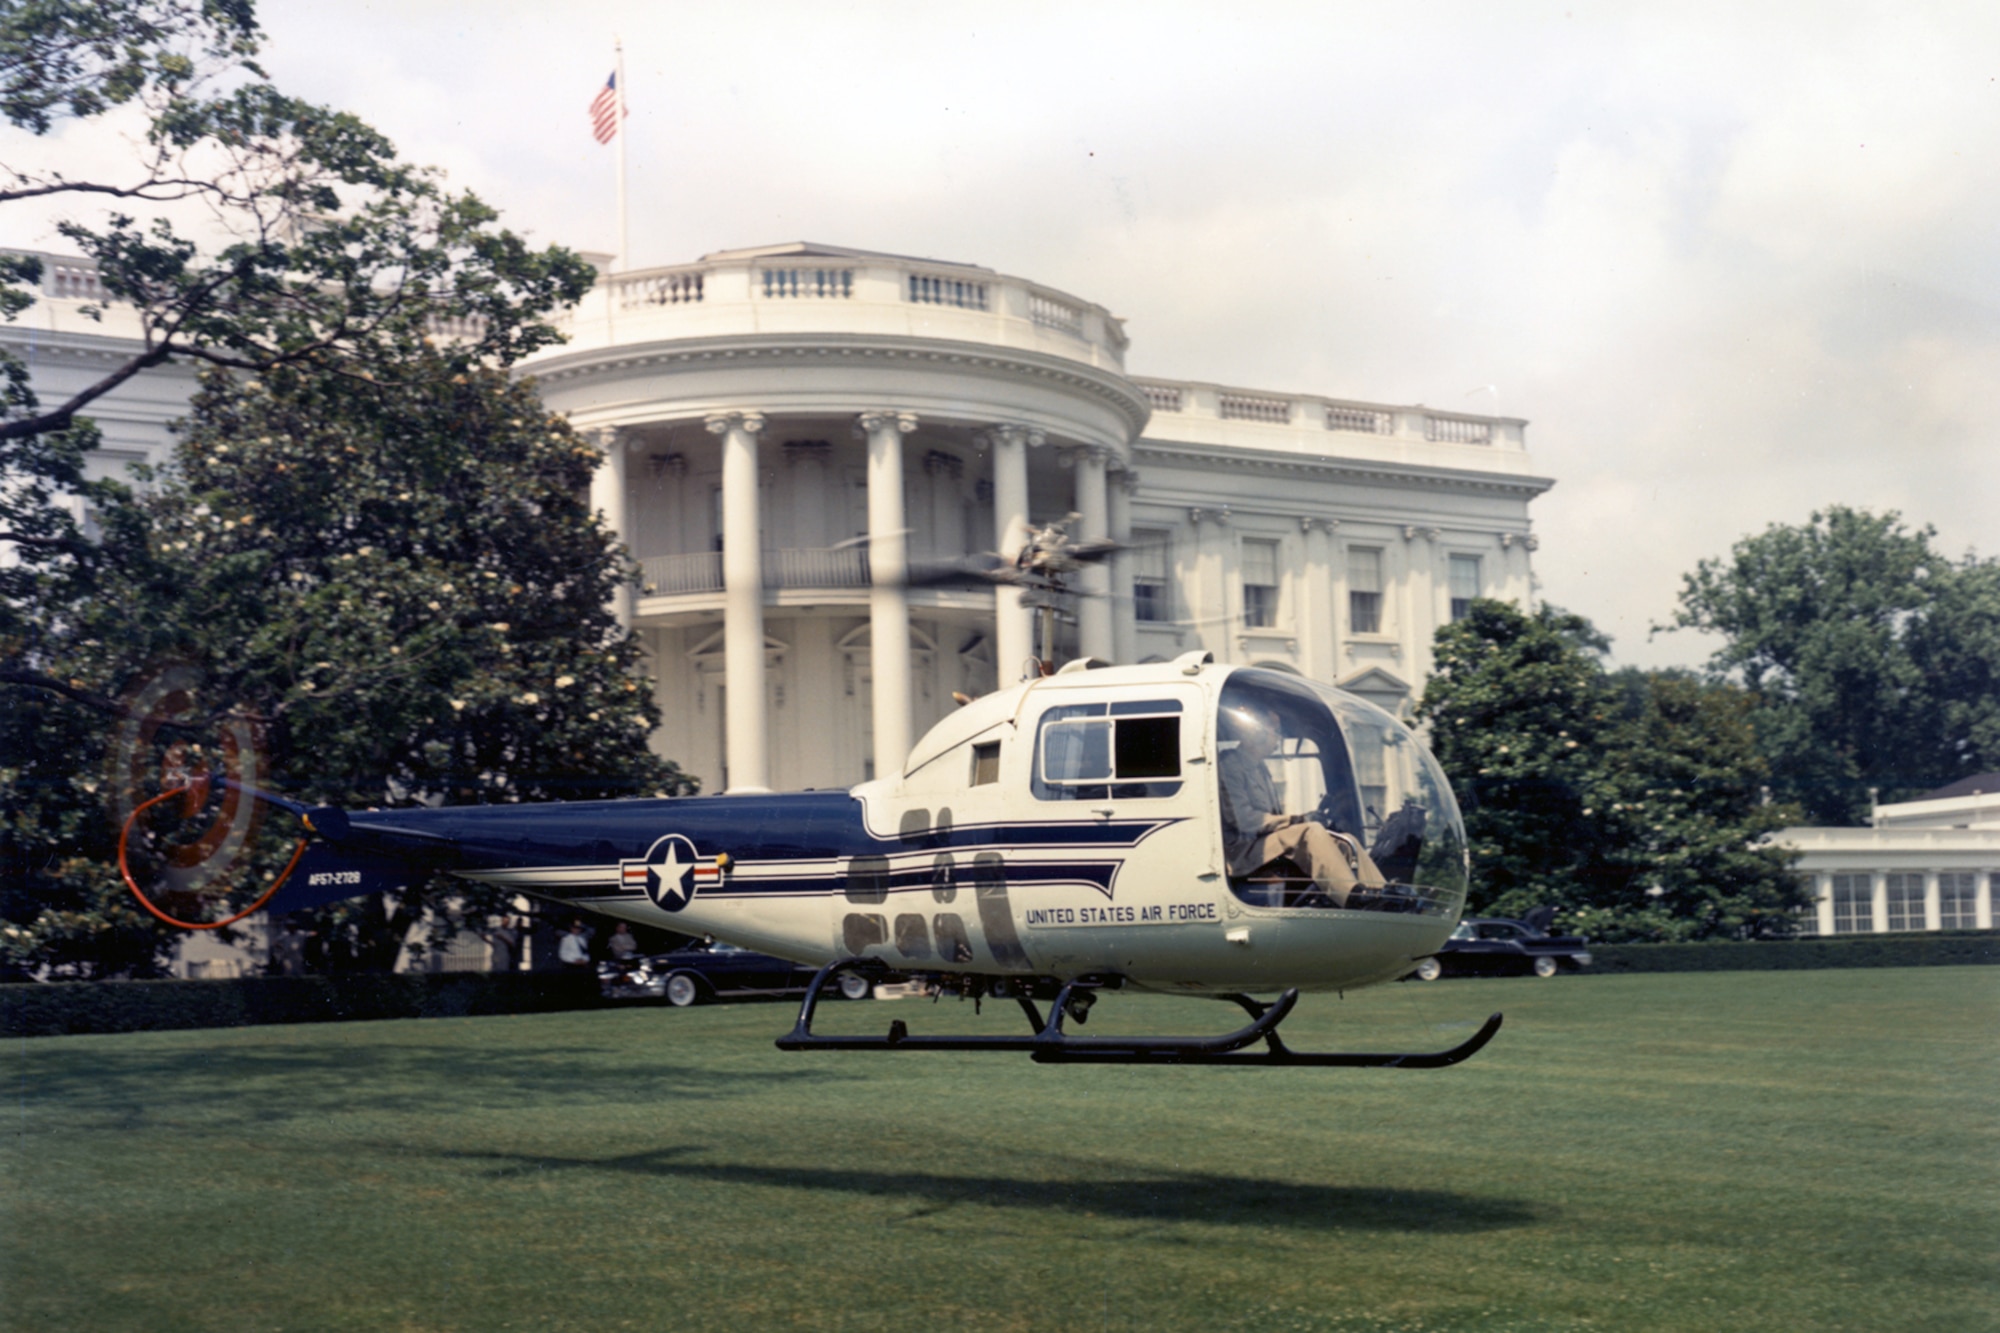 The UH-13J provided the president with quick and convenient air travel directly to and from the White House. The aircraft on display is shown landing on the West Lawn in 1957. (U.S. Air Force photo)